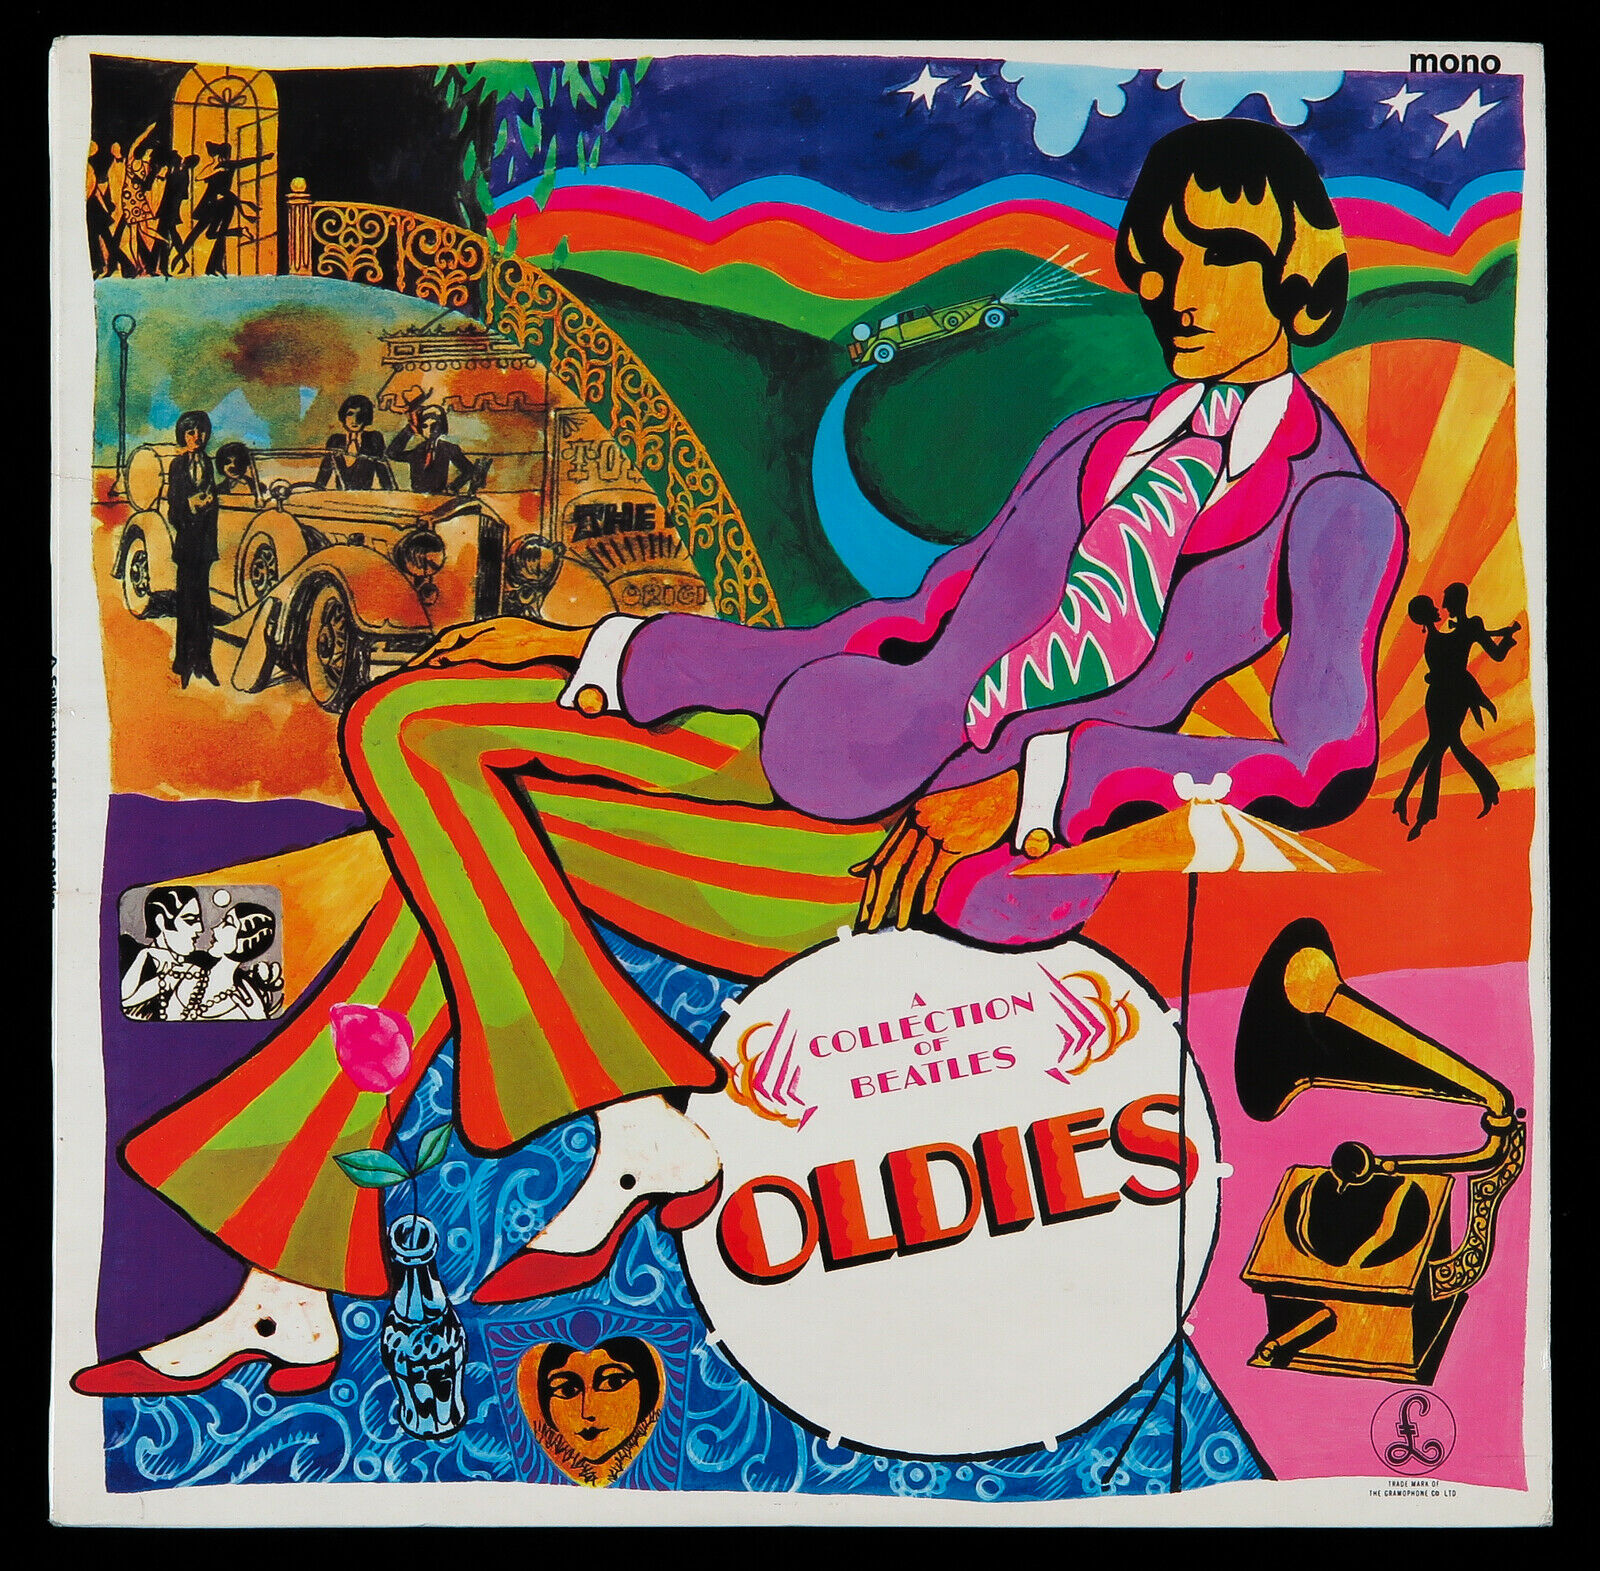 popsike.com - A Collection of Beatles Oldies - UK 1966 1st Press